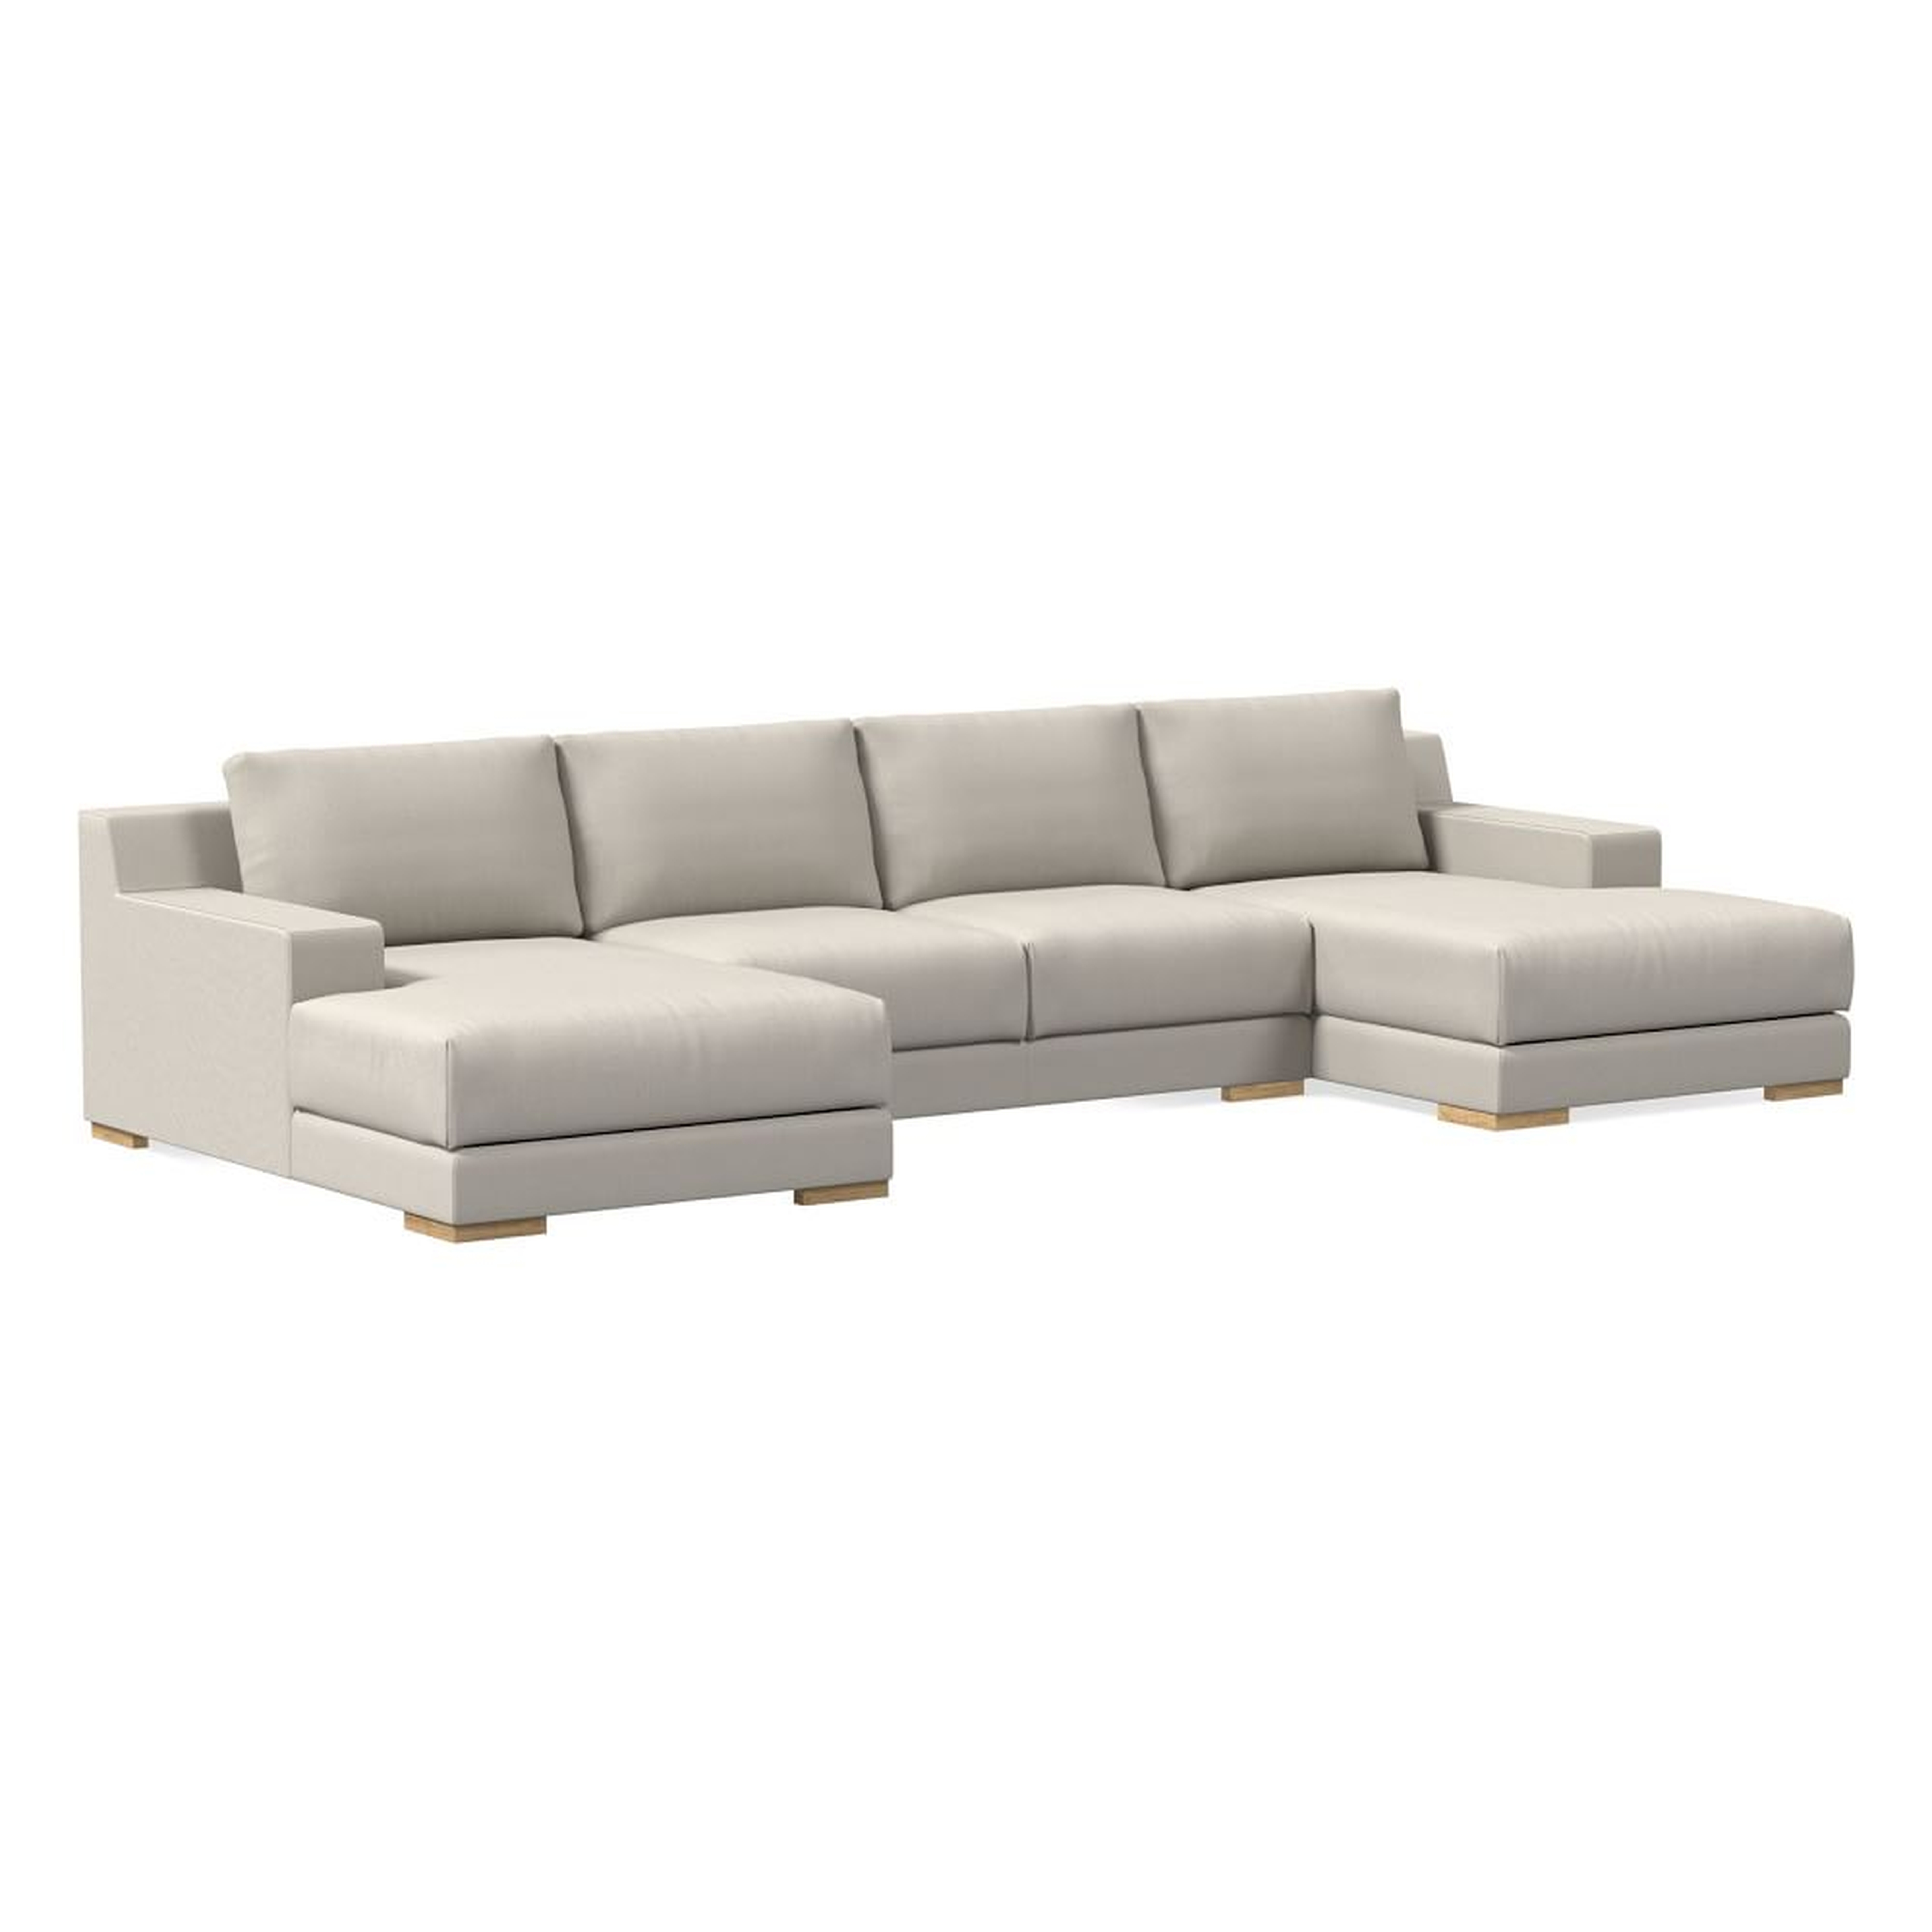 Dalton 151" 3-Piece U-Shaped Chaise Sectional, Yarn Dyed Linen Weave, Alabaster, Almond - West Elm